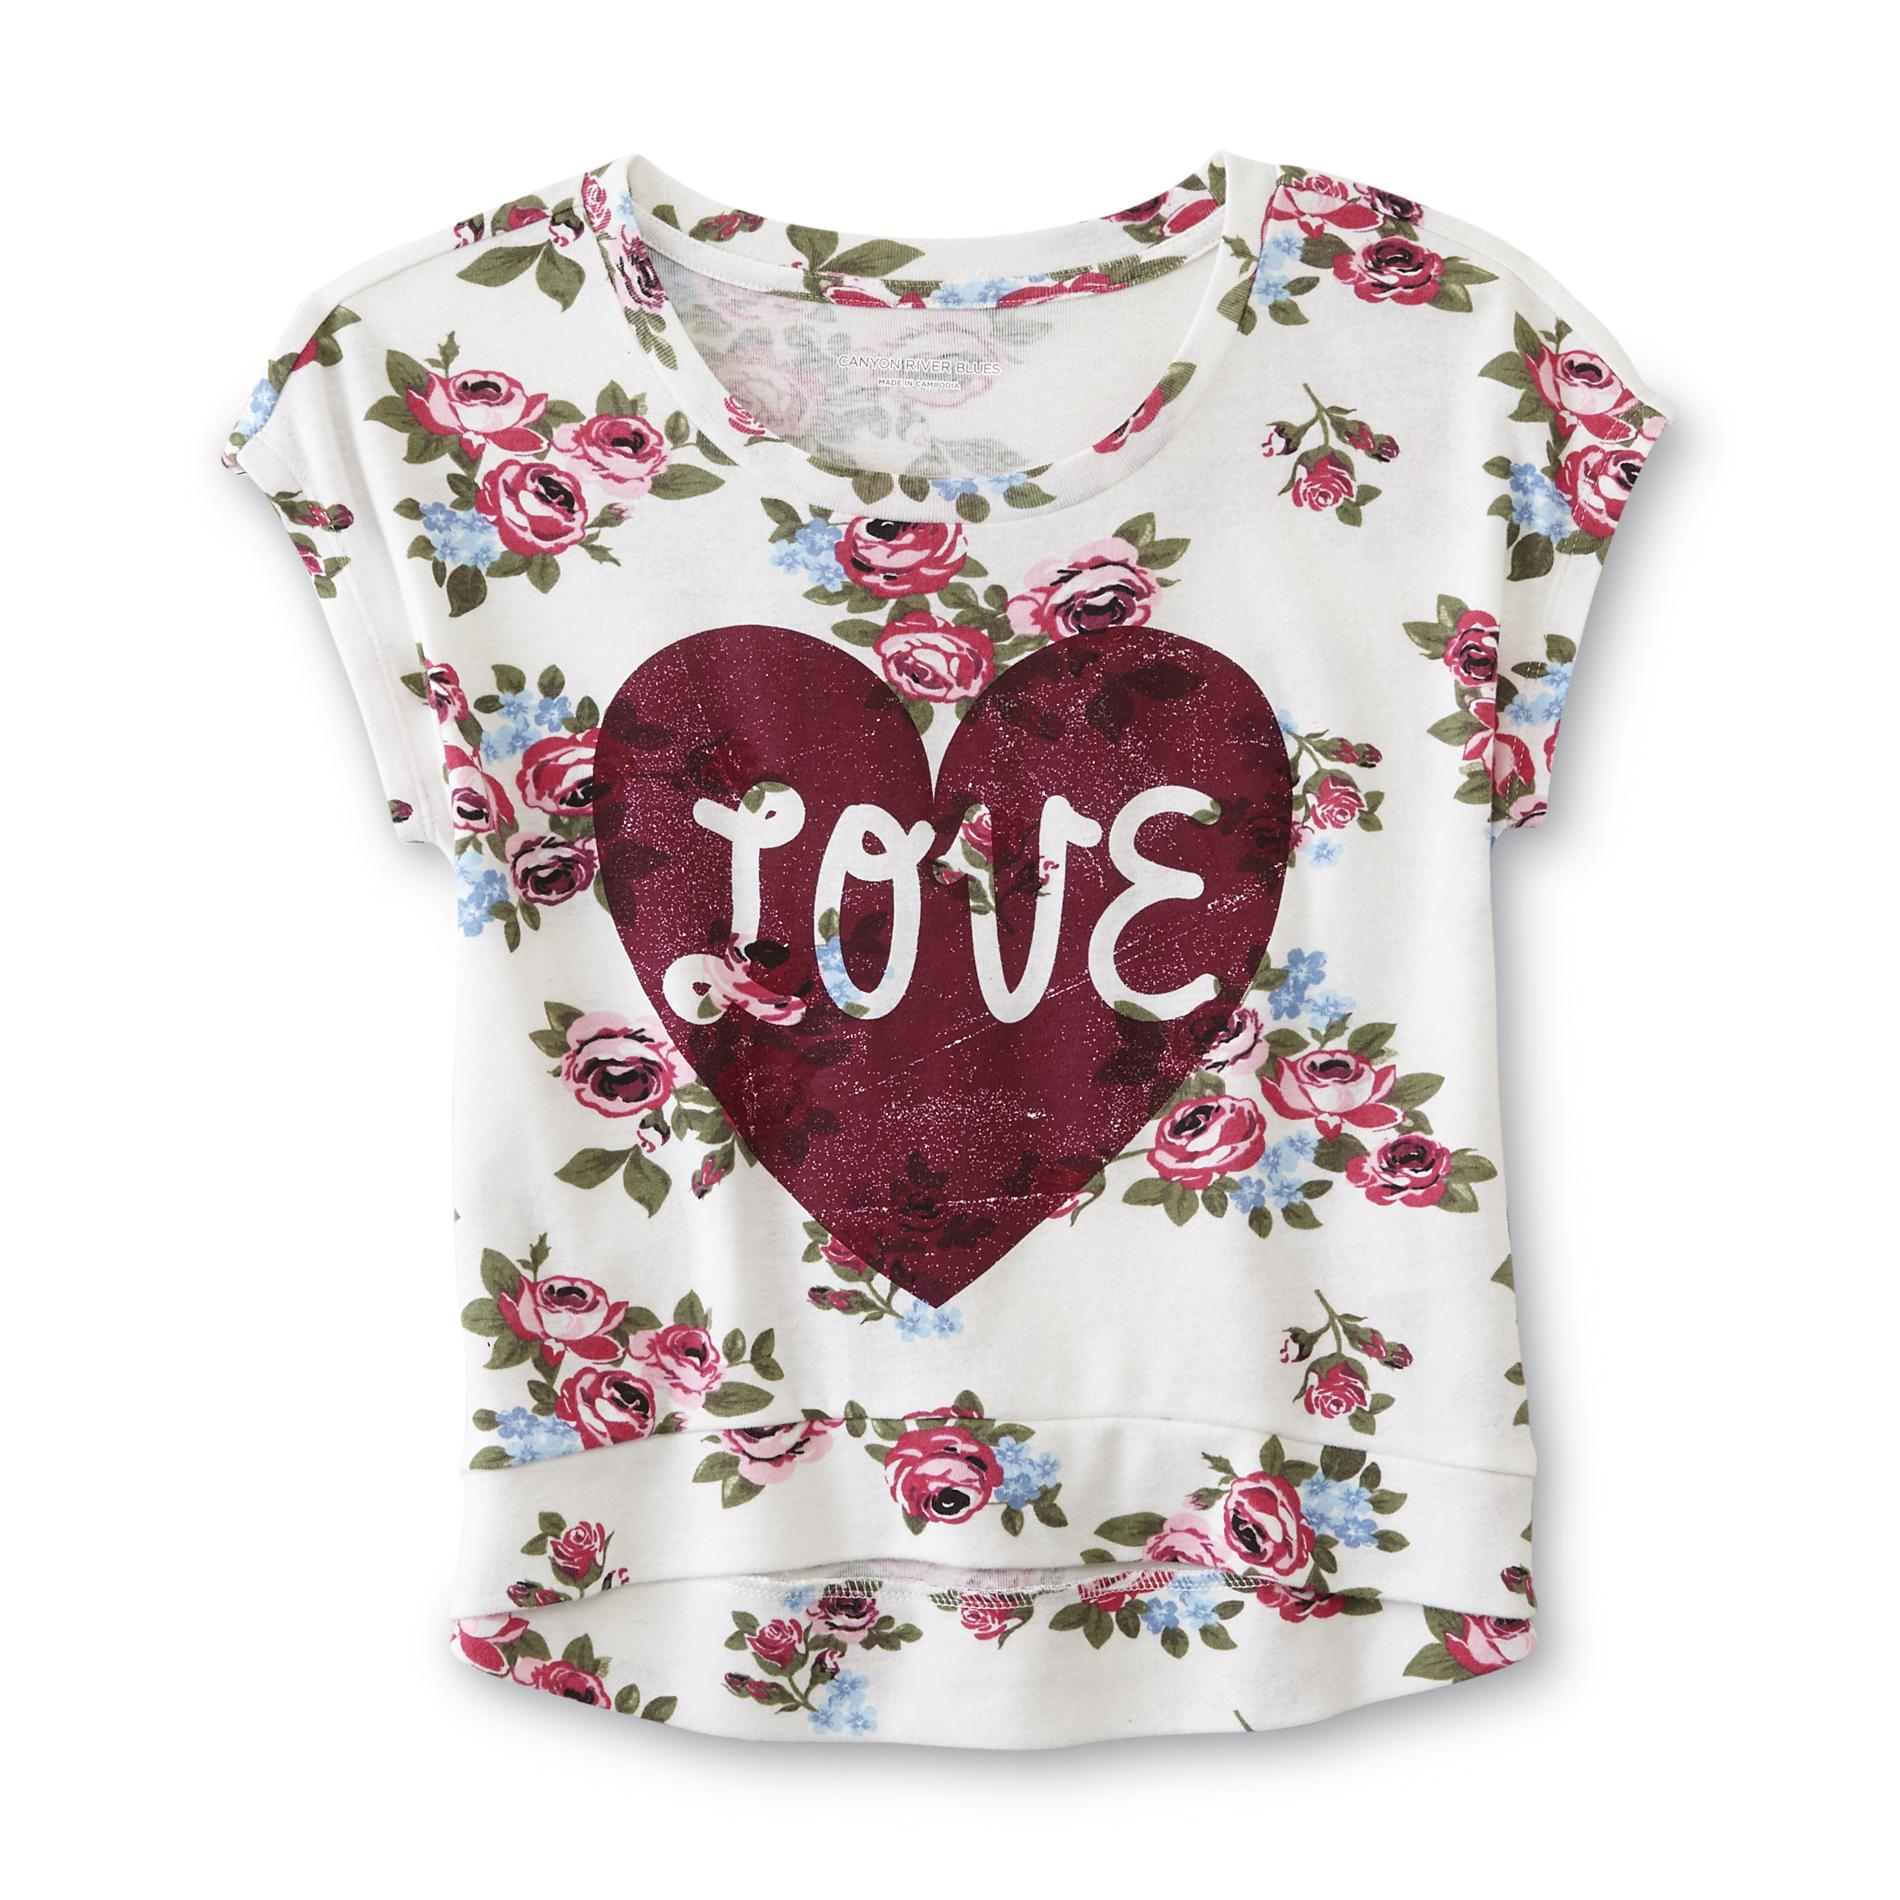 Canyon River Blues Girl's Knit Crop Top - Floral Print Love